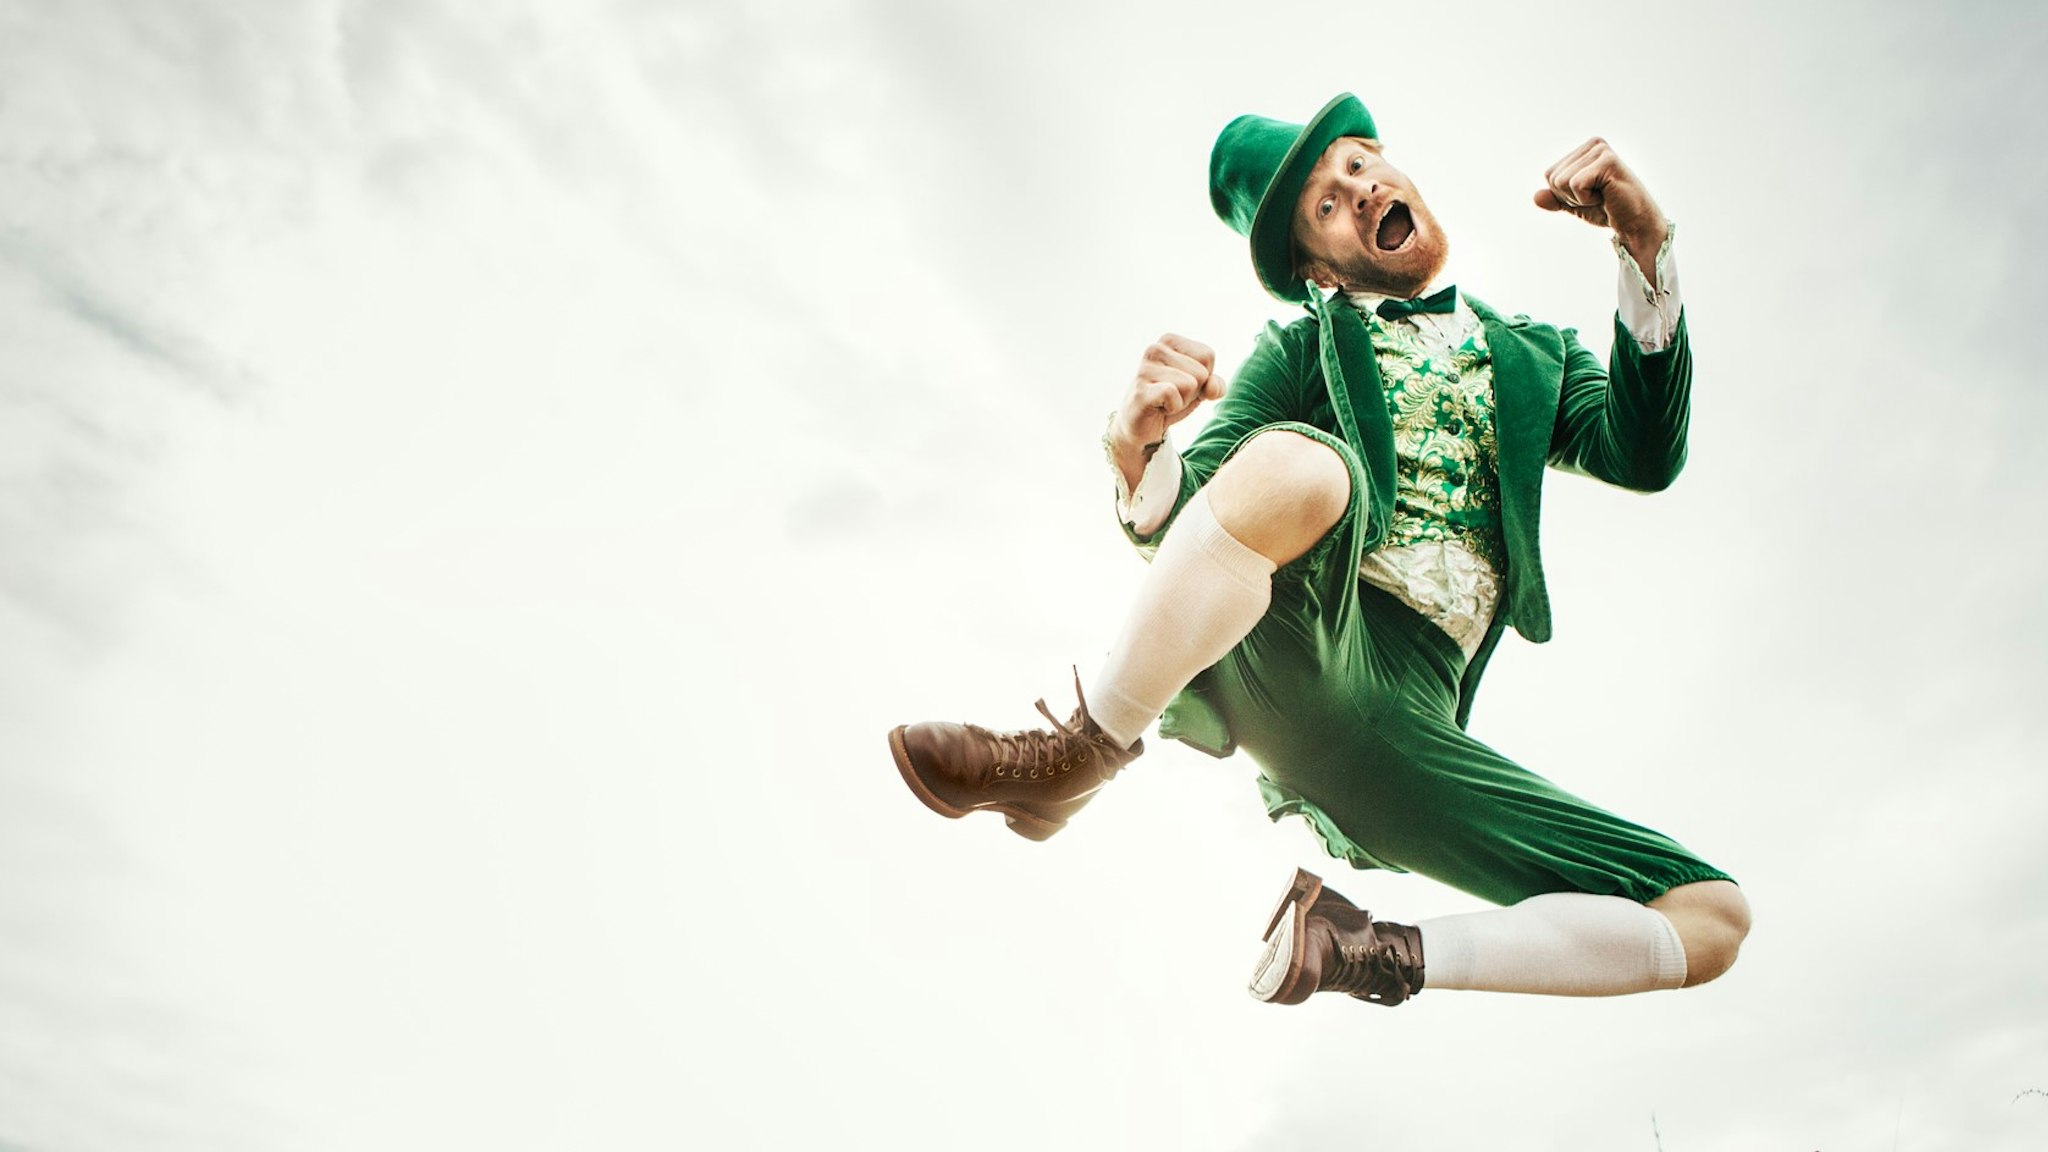 A stereotypical Irish character all ready for Saint Patricks day jumps and dances in an open field of Irish country side. Copy space in the sky and grass.